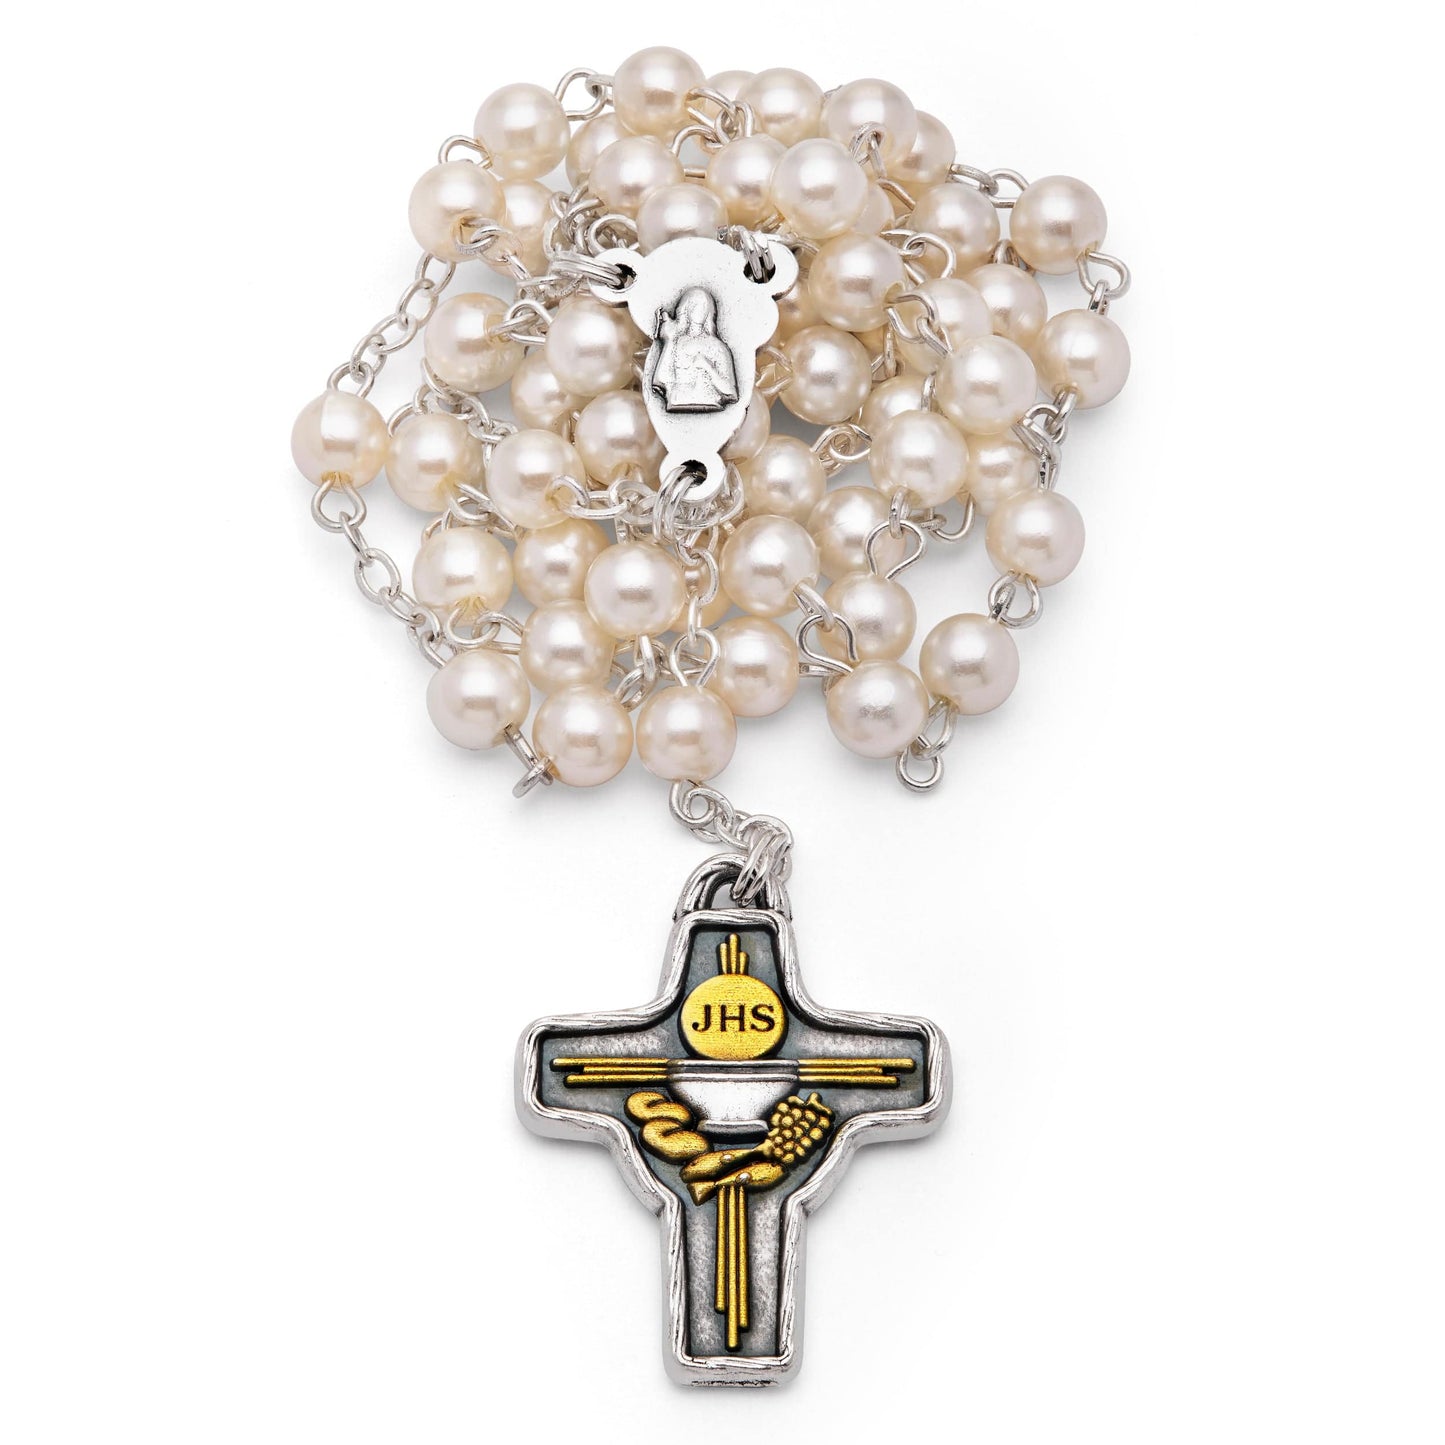 MONDO CATTOLICO Prayer Beads 36 cm (14.17 in) / 4 mm (0.15 in) First Comunion Case and Rosary